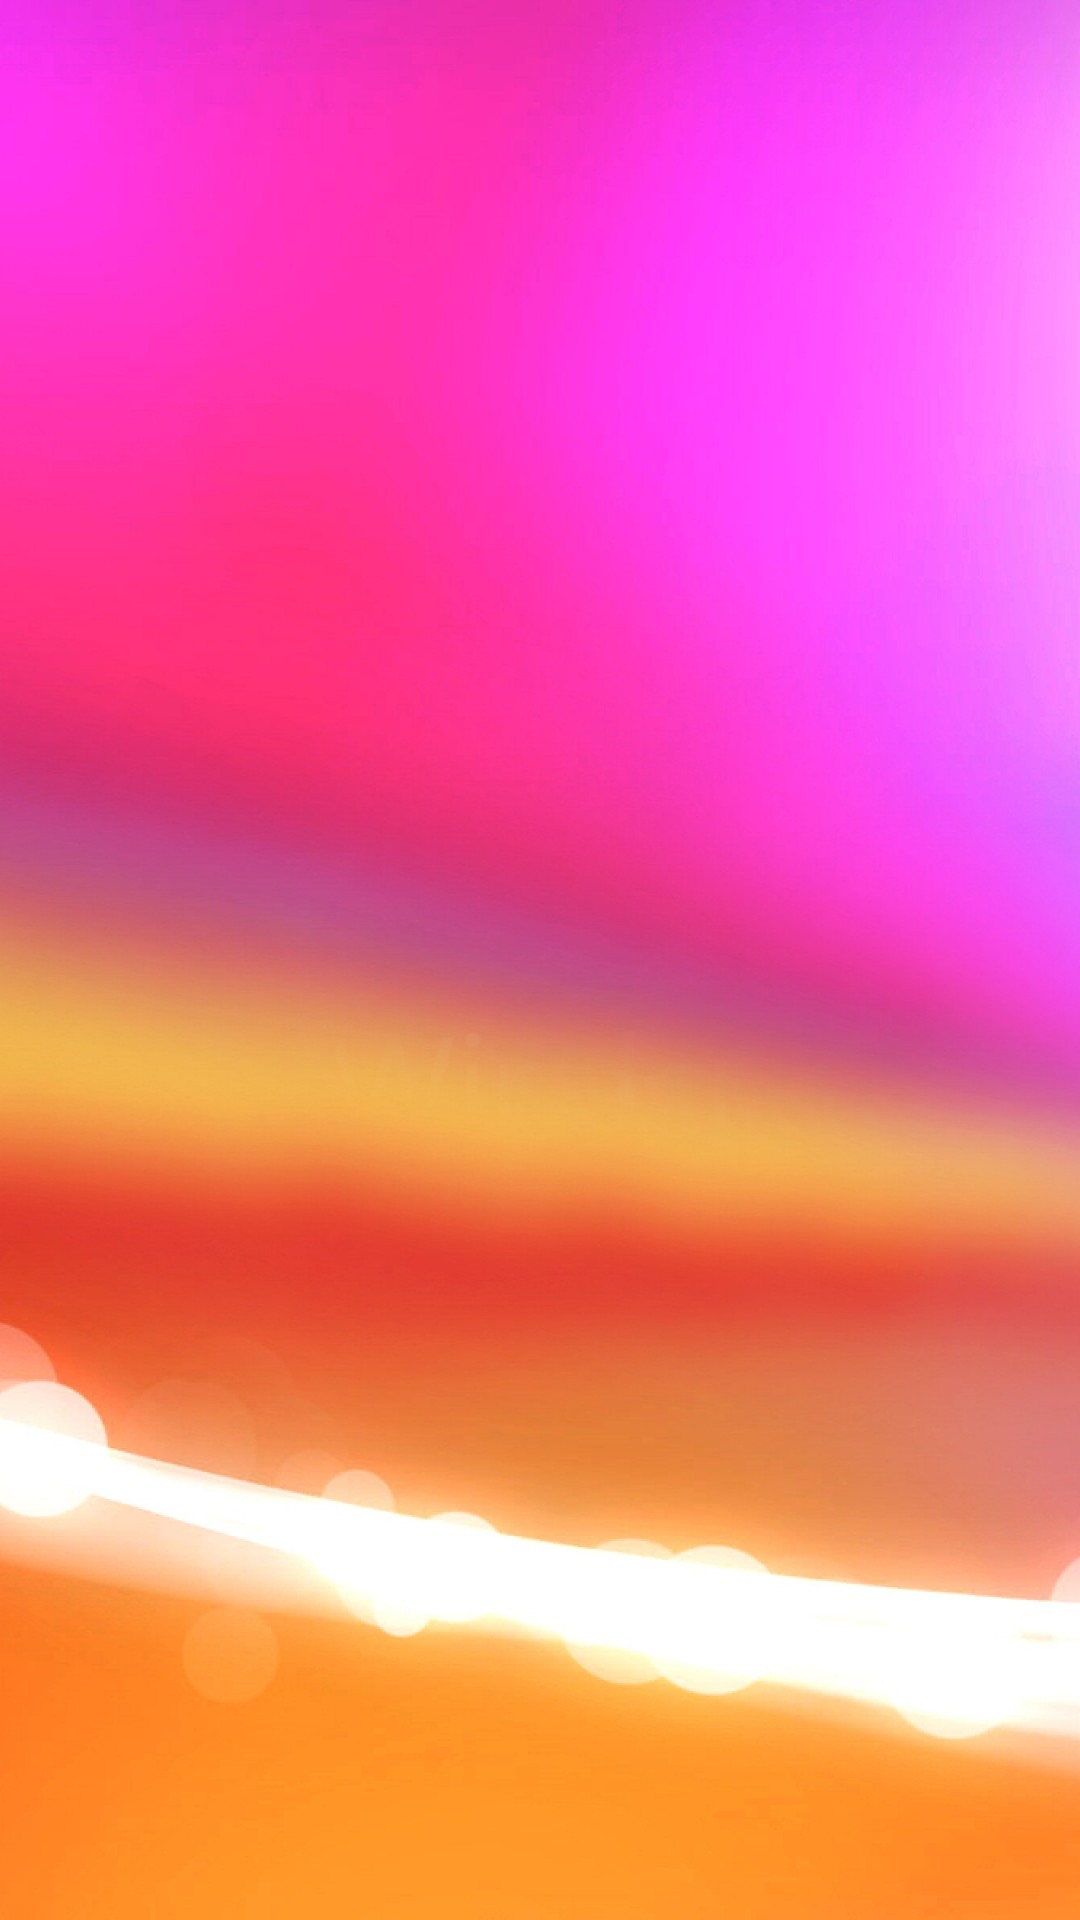 Colorful Blur Abstract Wallpaper 3050